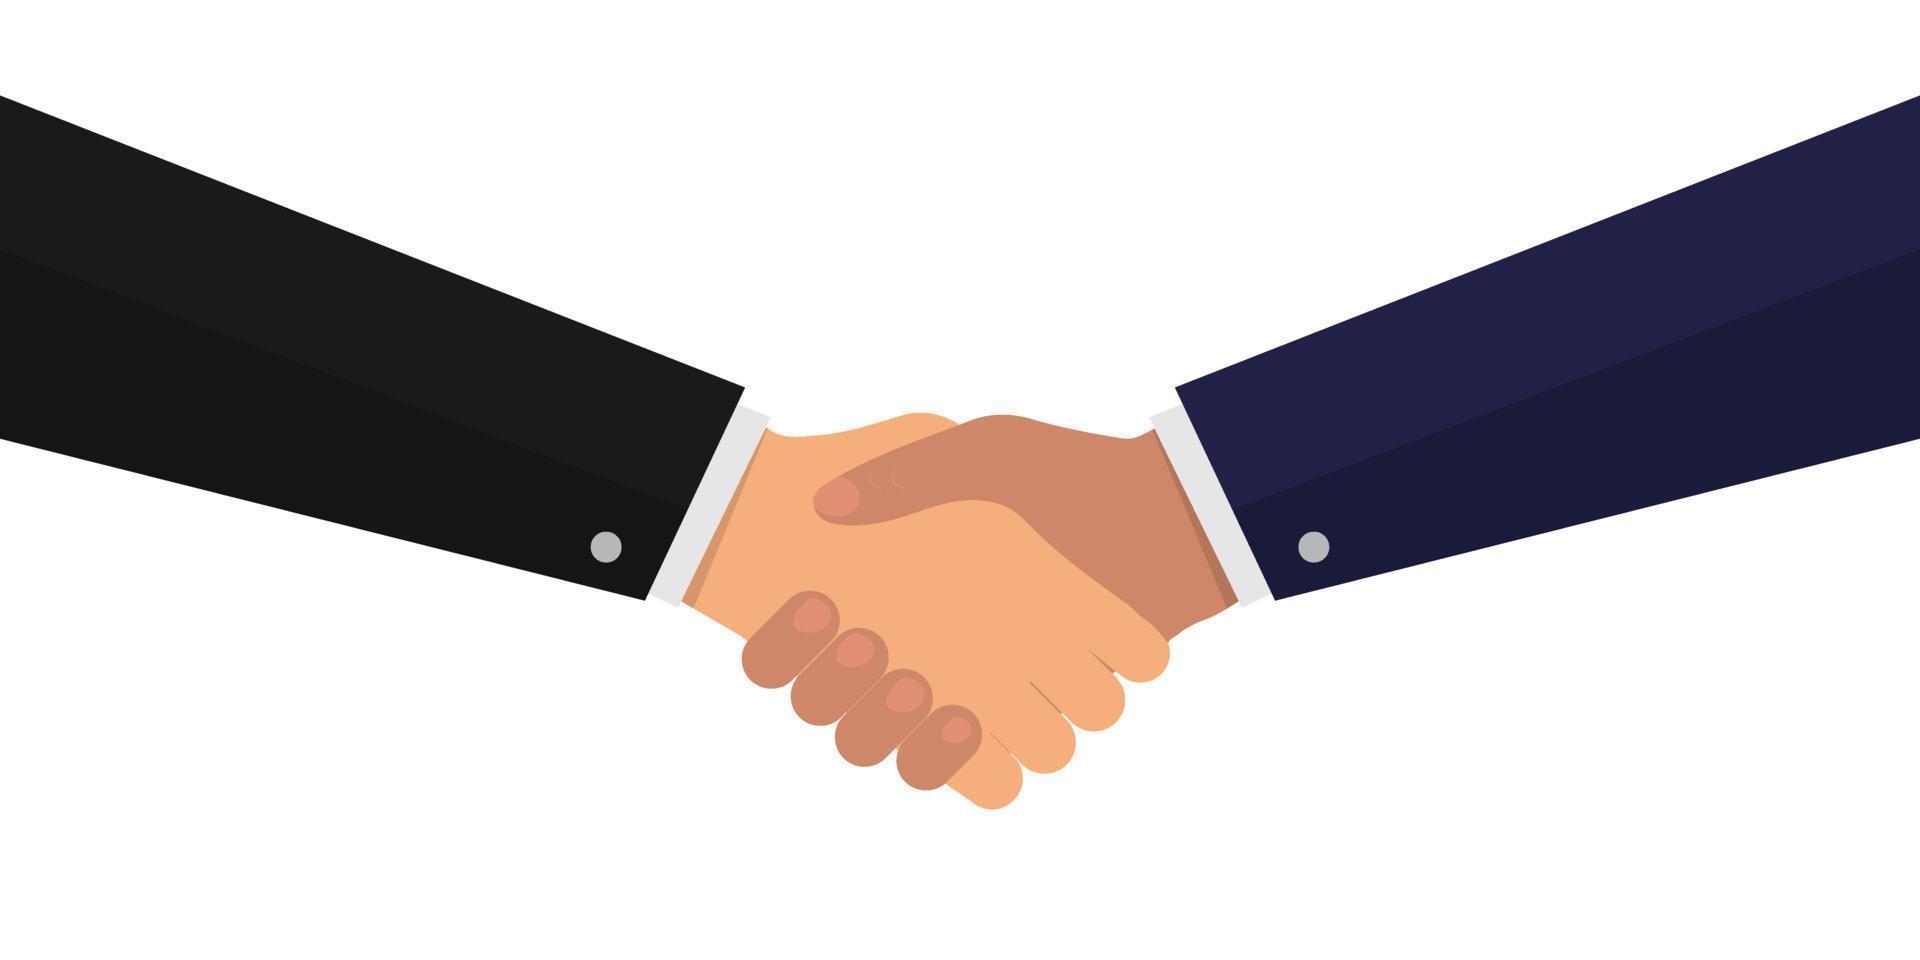 Handshake symbol, business deal concept. Isolated vector illustration on white background.